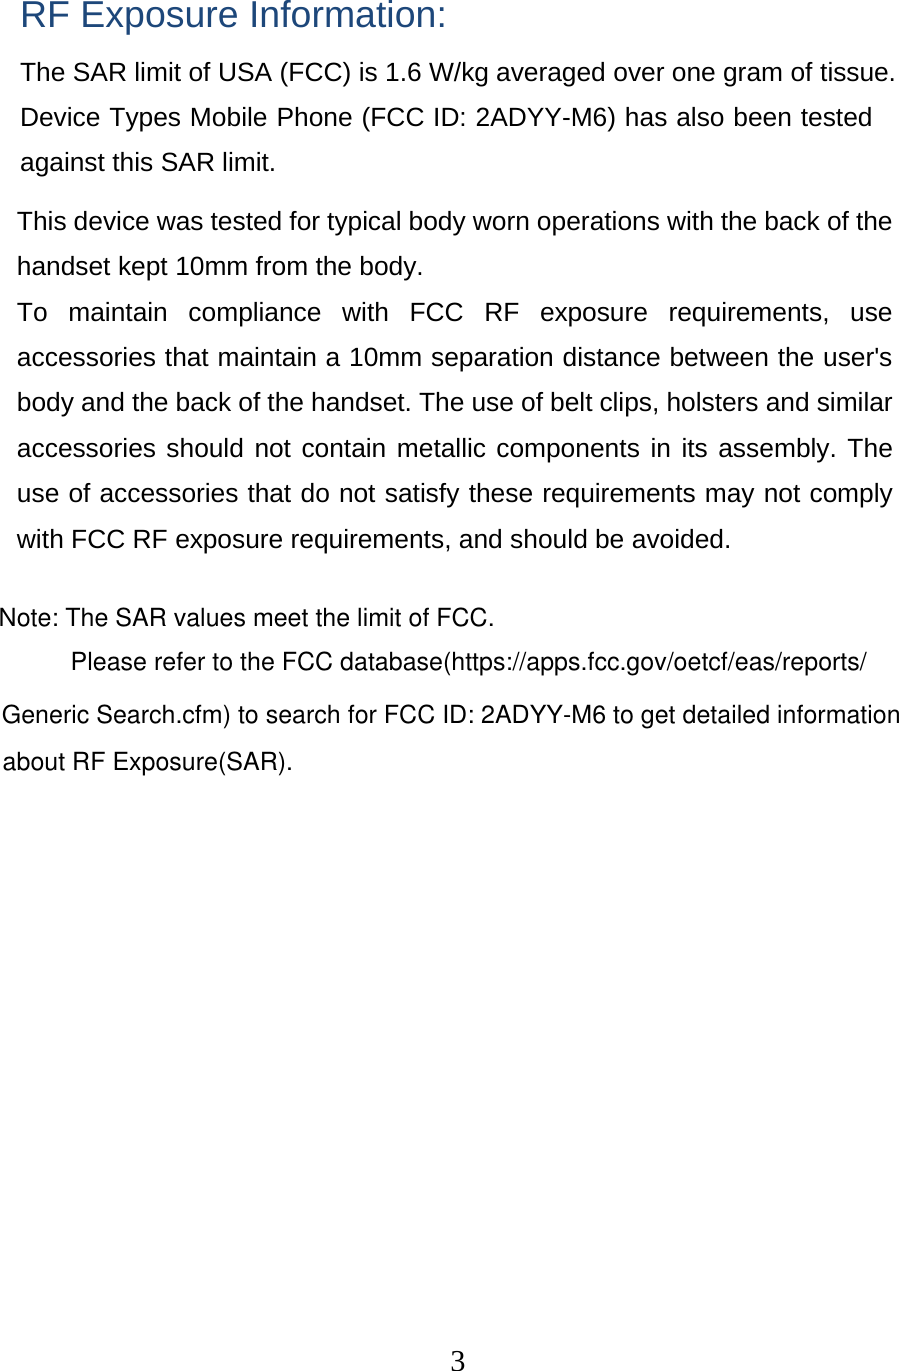  3 RF Exposure Information: The SAR limit of USA (FCC) is 1.6 W/kg averaged over one gram of tissue. Device Types Mobile Phone (FCC ID: 2ADYY-M6) has also been tested against this SAR limit. This device was tested for typical body worn operations with the back of the handset kept 10mm from the body. To maintain compliance with FCC RF exposure requirements, use accessories that maintain a 10mm separation distance between the user&apos;s body and the back of the handset. The use of belt clips, holsters and similar accessories should not contain metallic components in its assembly. The use of accessories that do not satisfy these requirements may not comply with FCC RF exposure requirements, and should be avoided. Note: The SAR values meet the limit of FCC.Please refer to the FCC database(https://apps.fcc.gov/oetcf/eas/reports/Generic Search.cfm) to search for FCC ID: 2ADYY-M6 to get detailed informationabout RF Exposure(SAR).